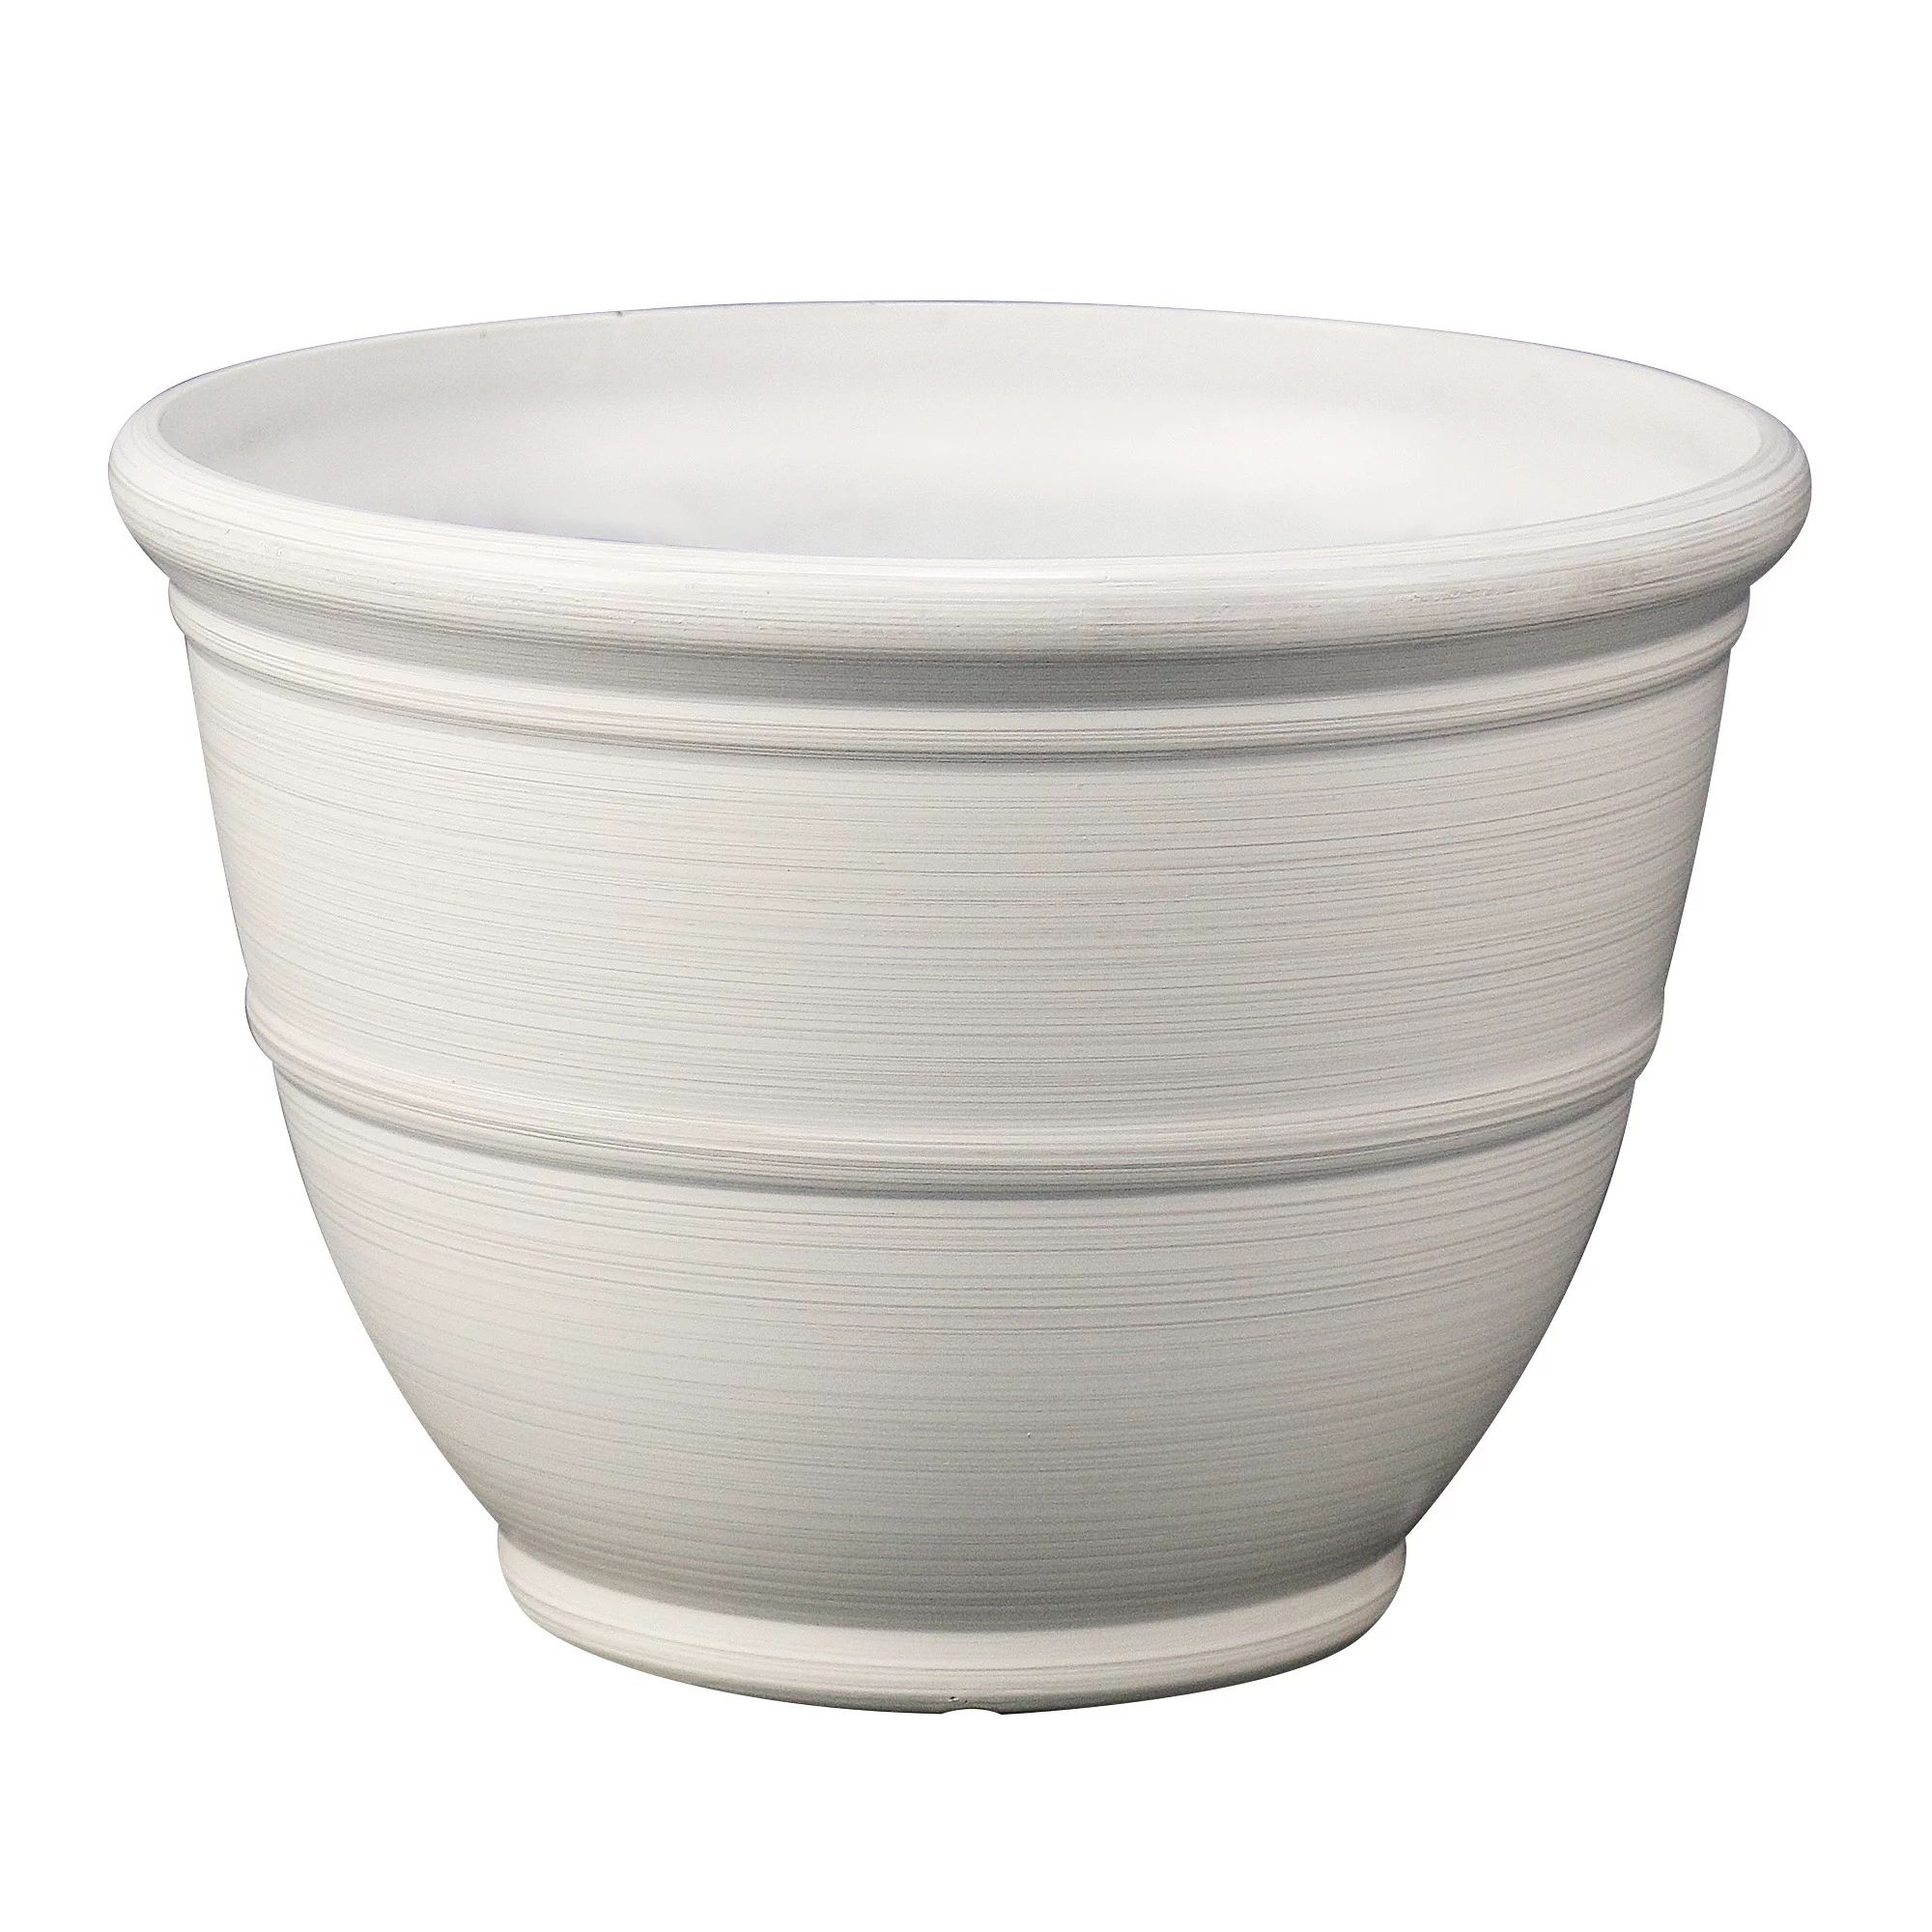 Mainstays Ferenza White Color Recycled Resin Planter, 14in x 14in x 10in, Set of 2 | Walmart (US)